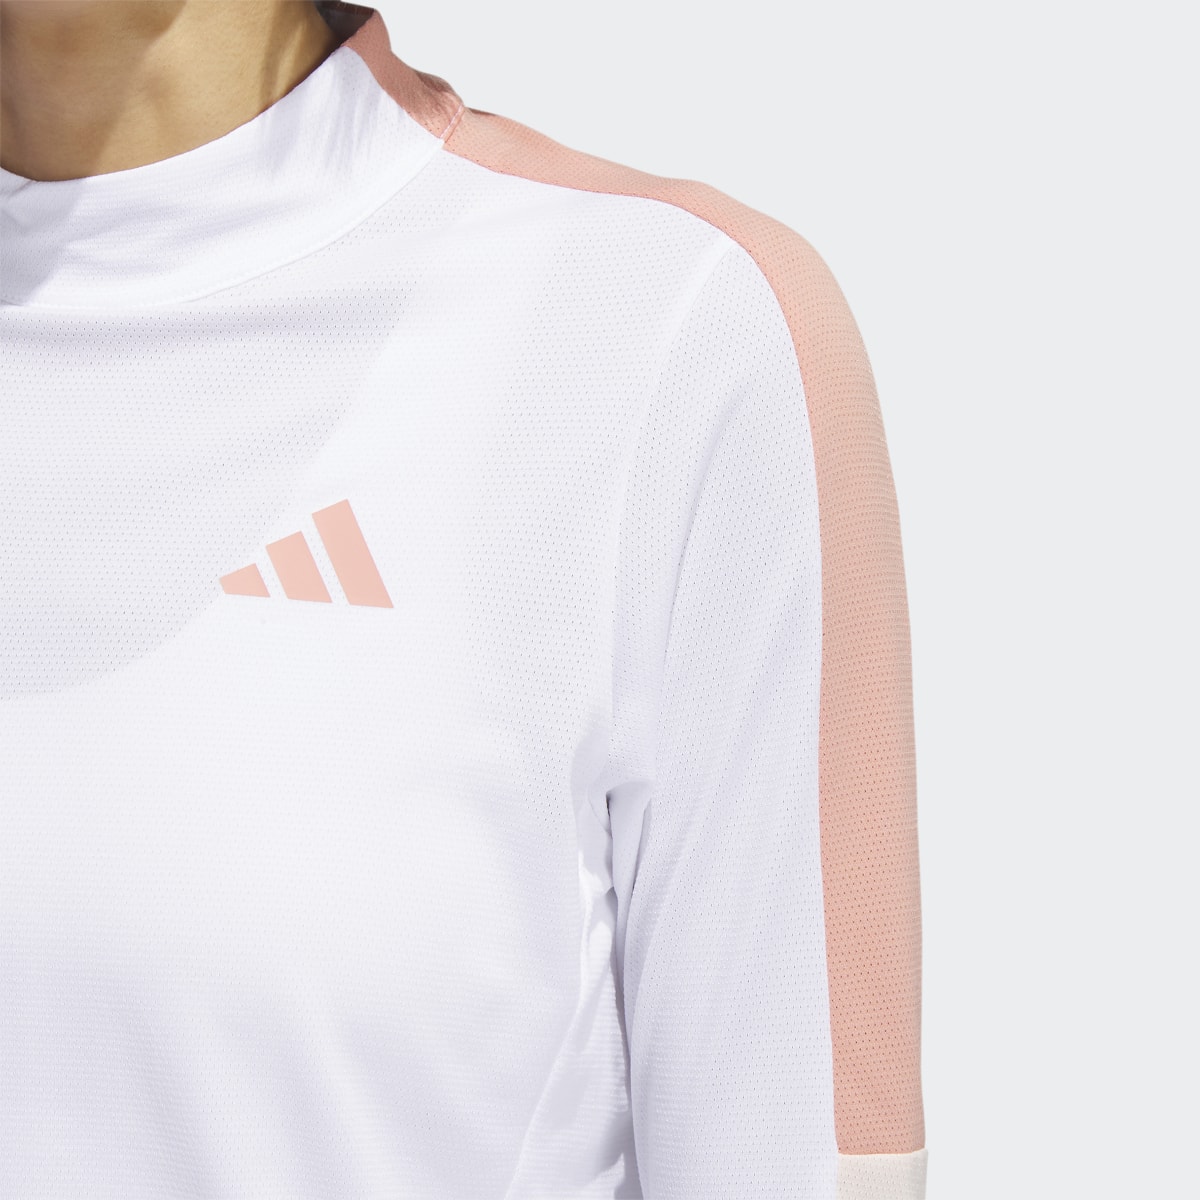 Adidas Made With Nature Mock Neck Long-Sleeve Top. 7